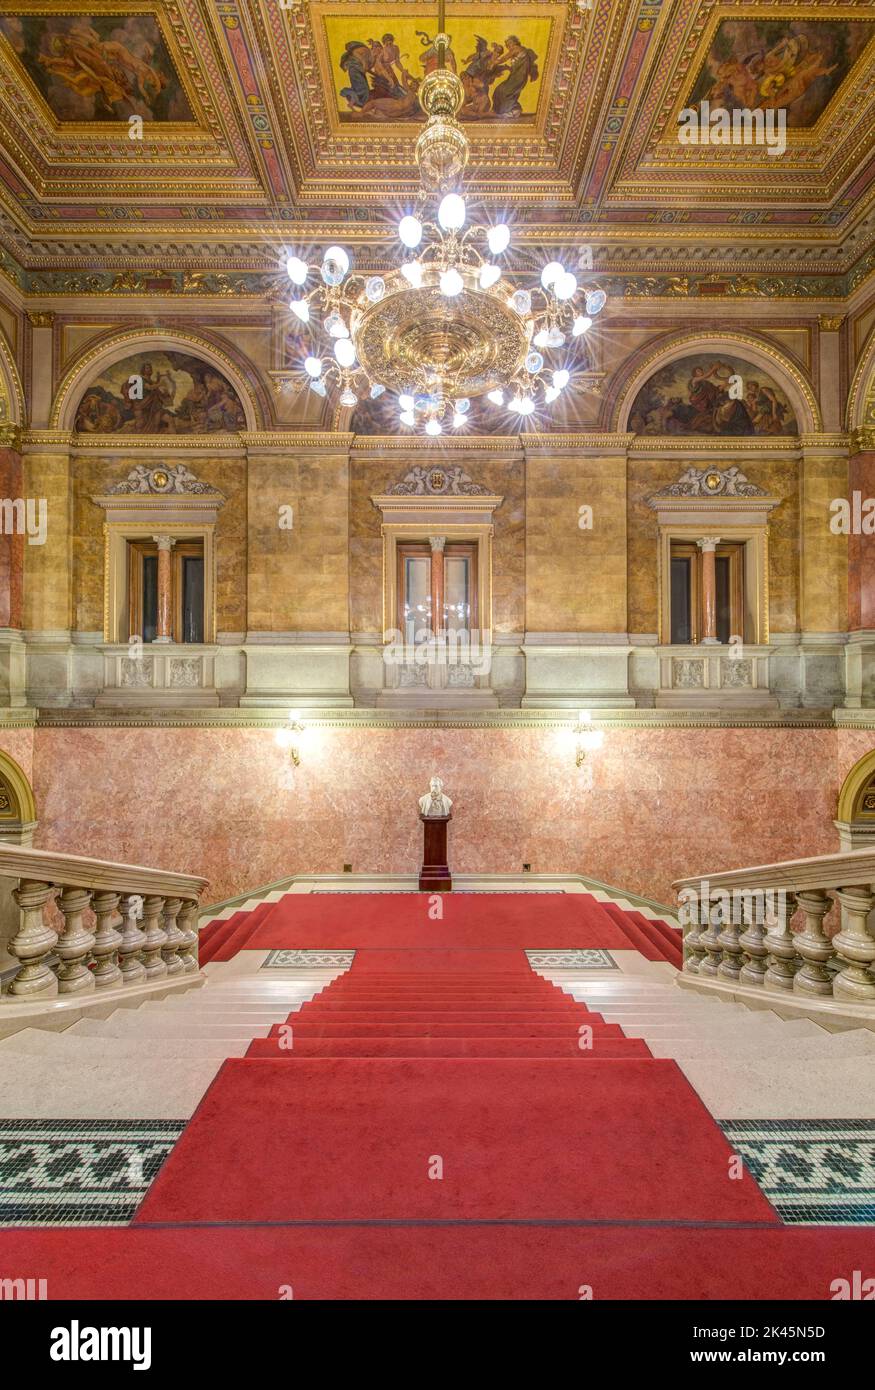 The Hungarian State Opera House, built in the 1880s, interior double staircase with a red carpet. Stock Photo